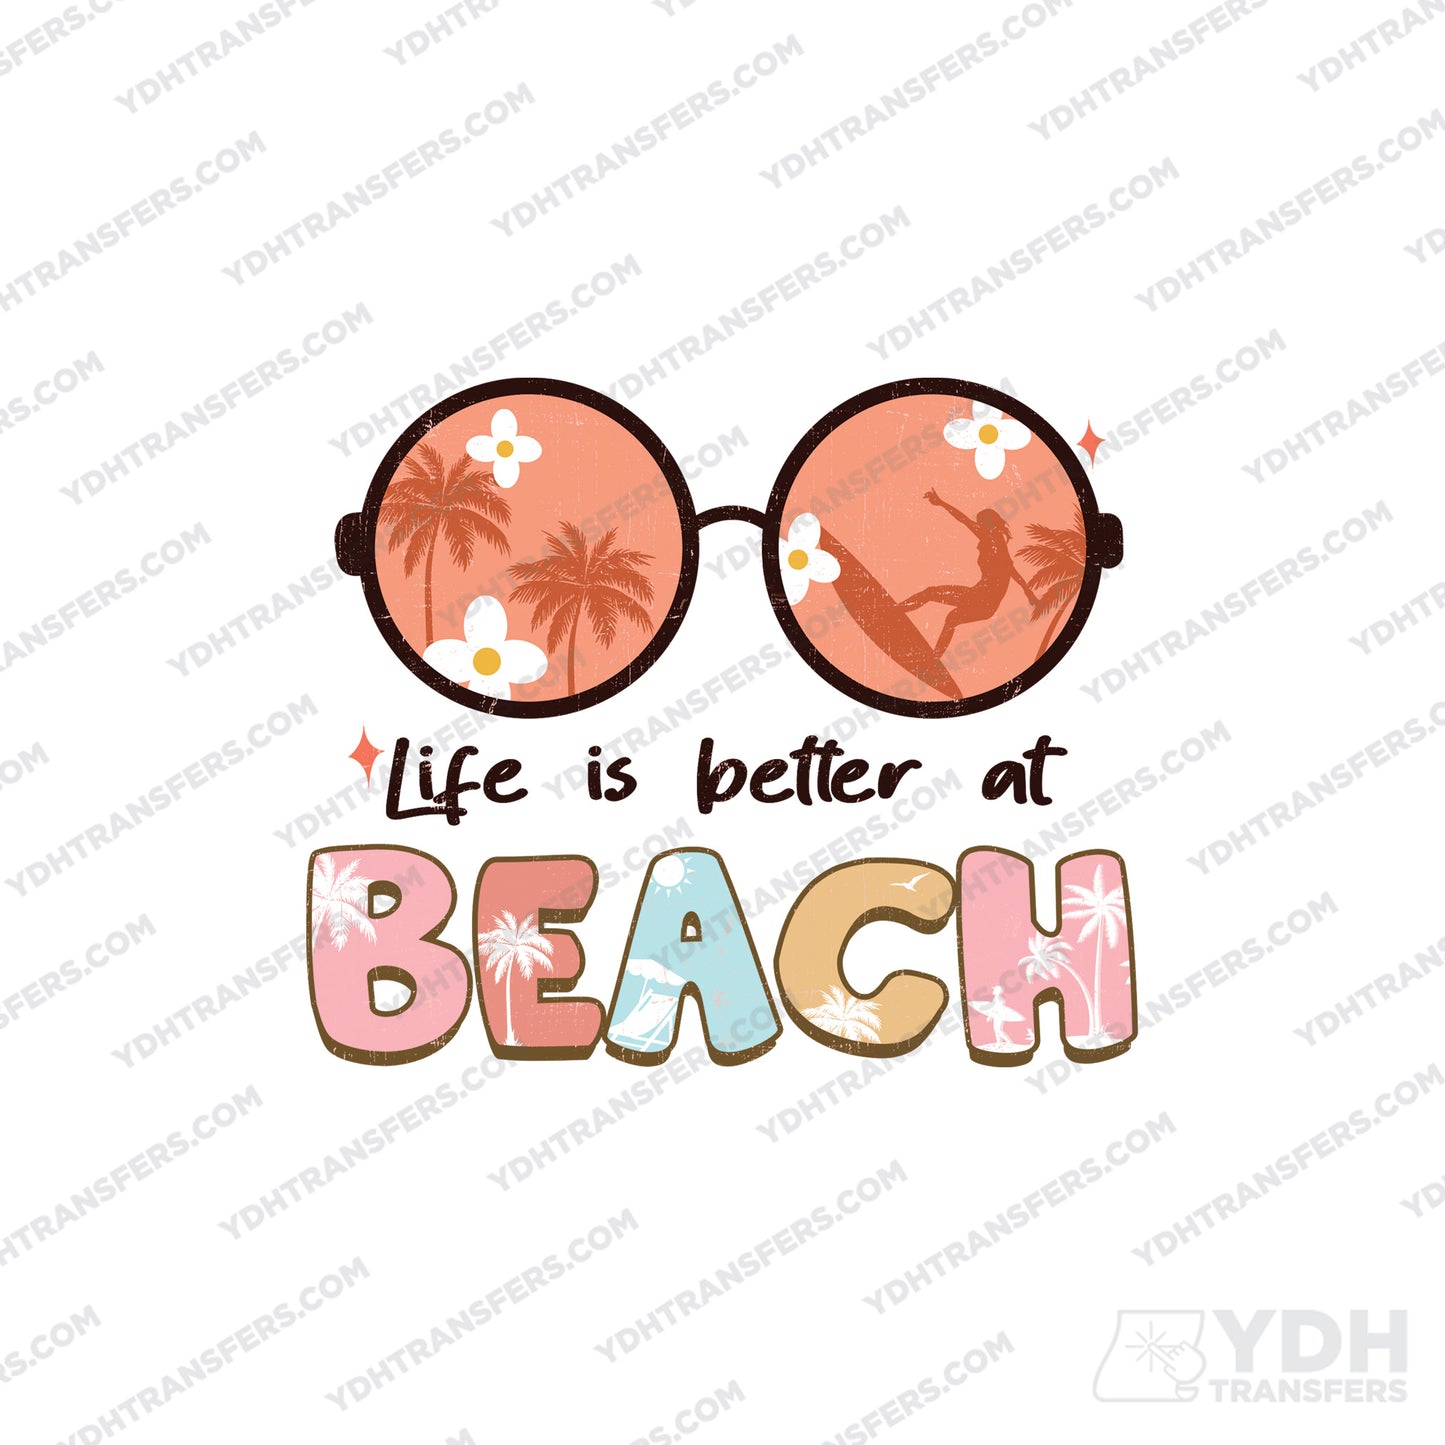 Life is better at the Beach Full Color Transfer